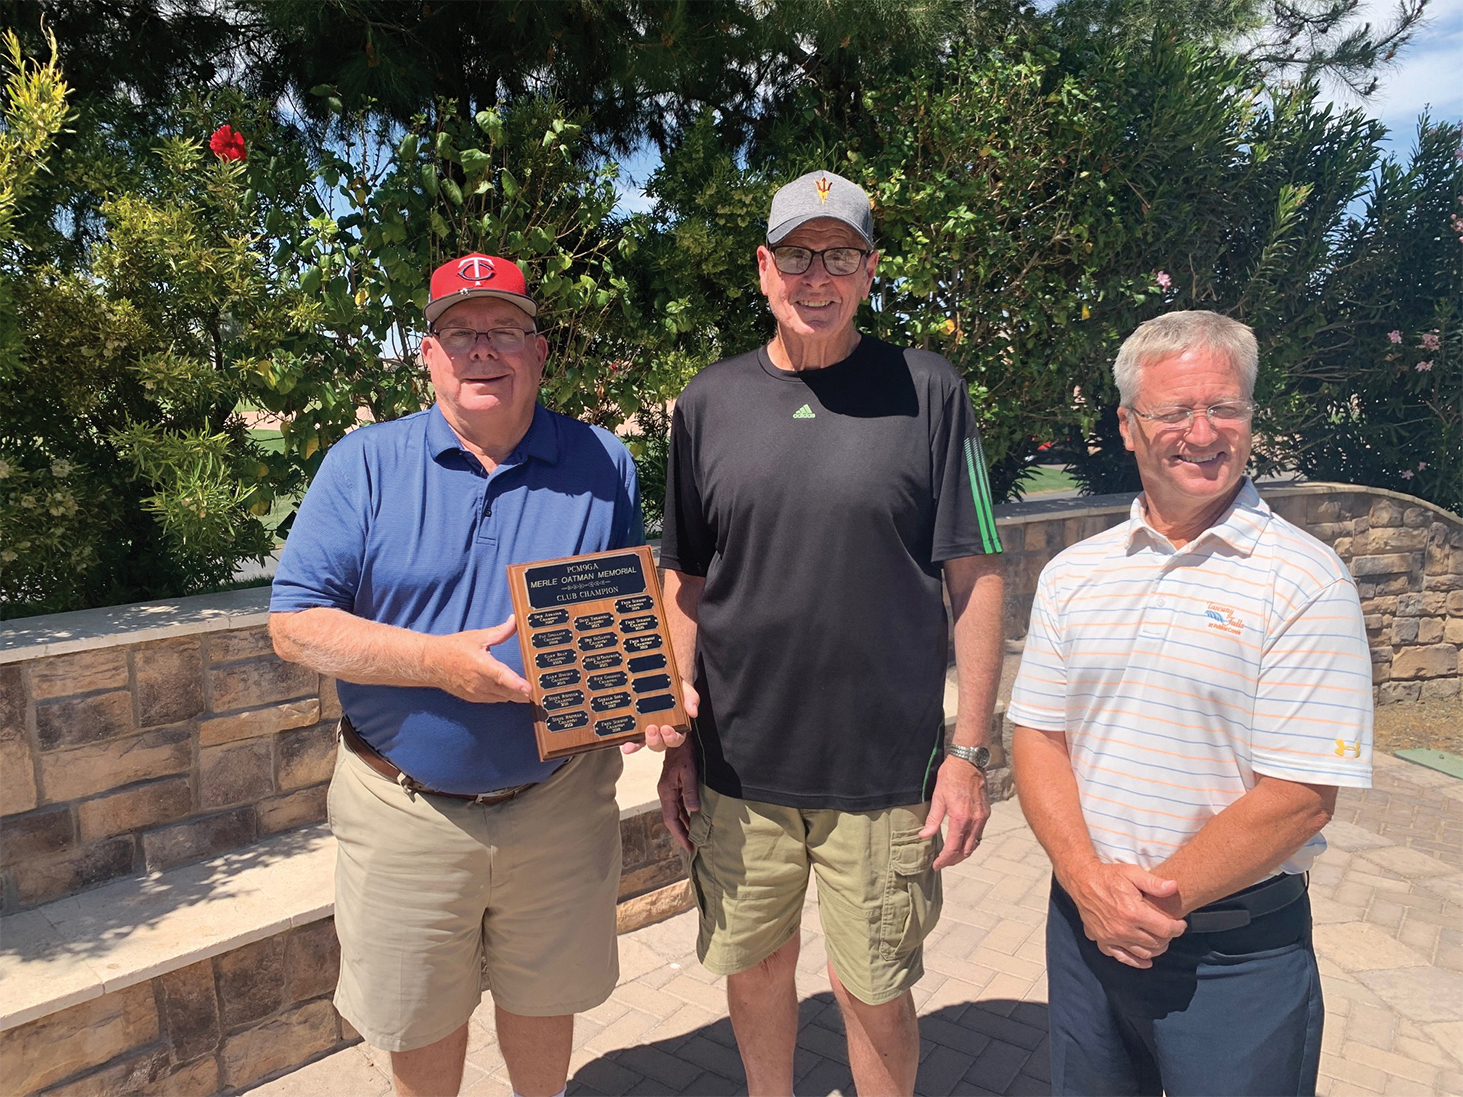 Bill Lansing, PCM9GA director of golf operations, presents the 2021 Men’s 9 Holers Low Gross Champion plaque to Fred Schmidt with Tuscany pro David Vader